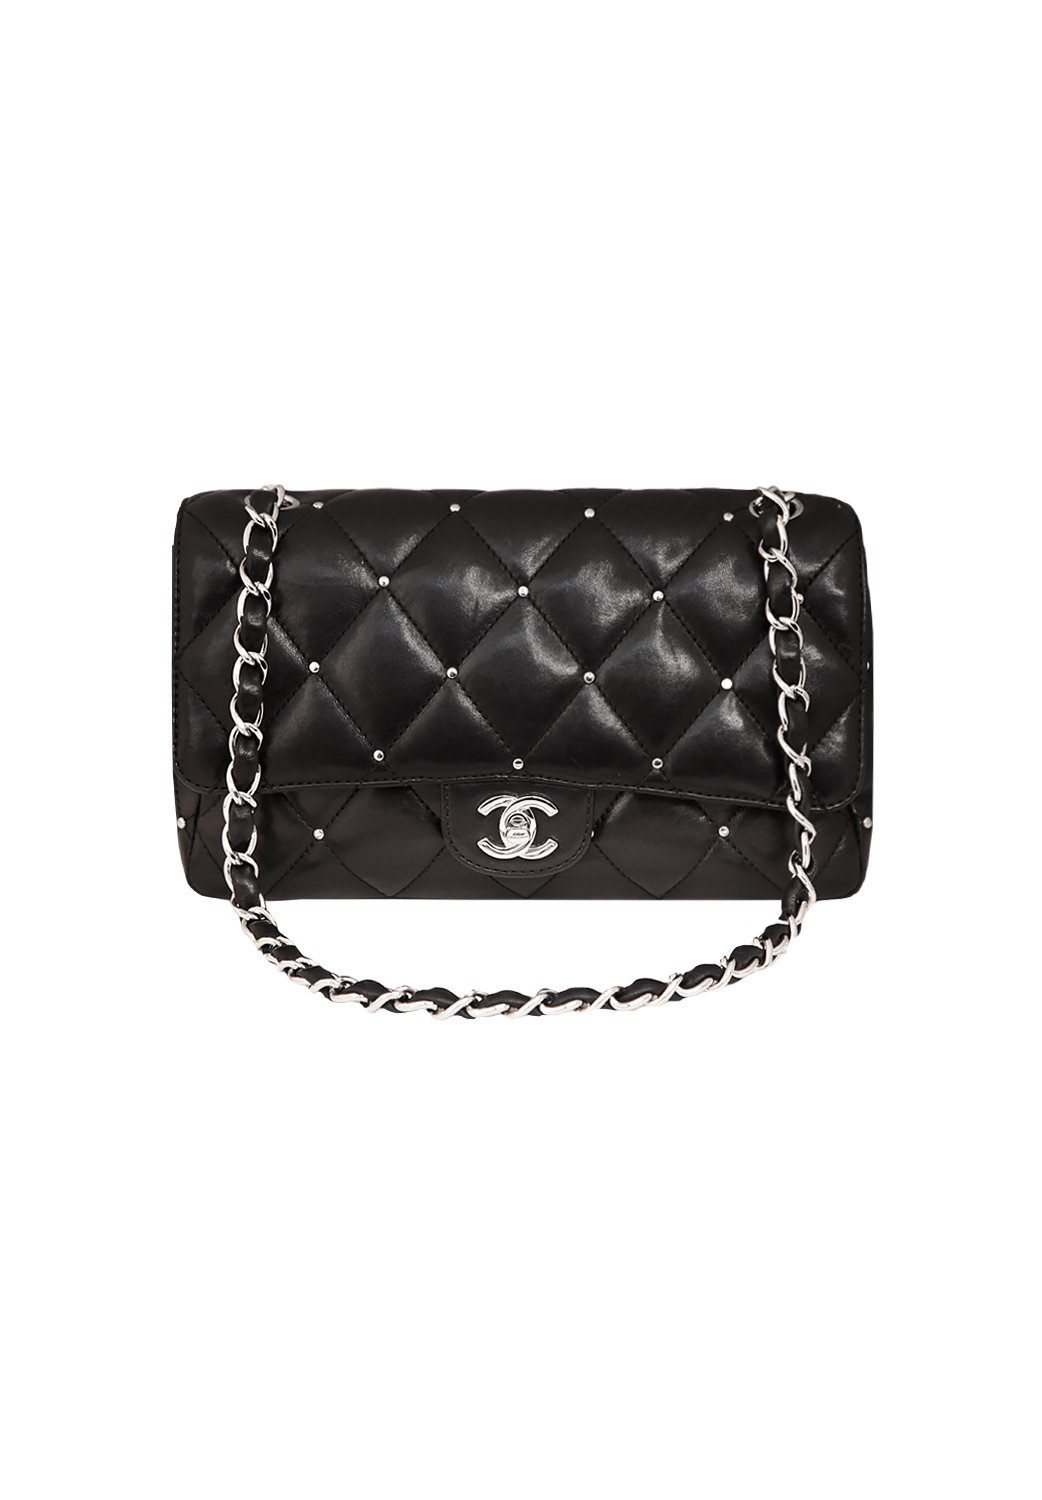 Chanel Studded Quilted Flap Bag in Black.jpg